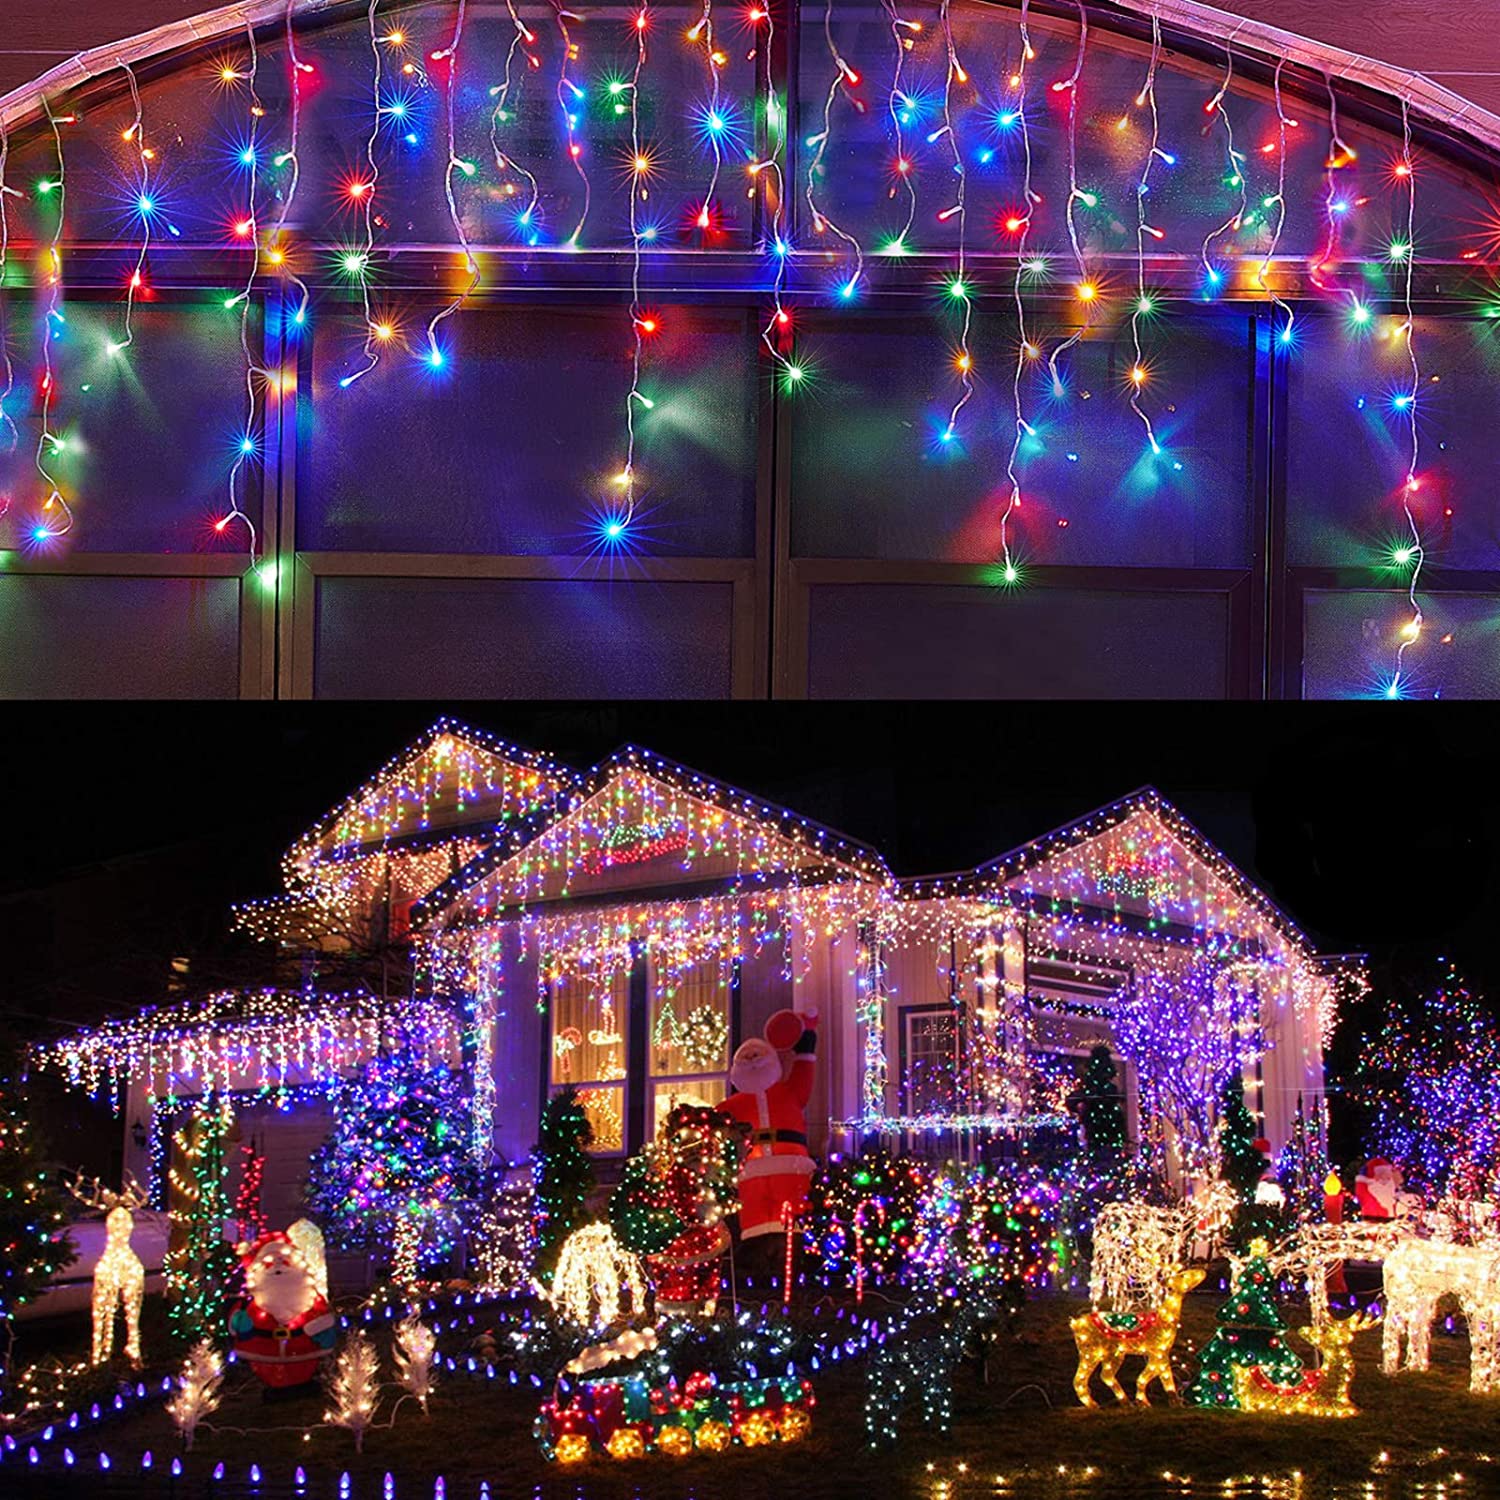 Best Led Icicle Christmas Lights [Updated December 2021]